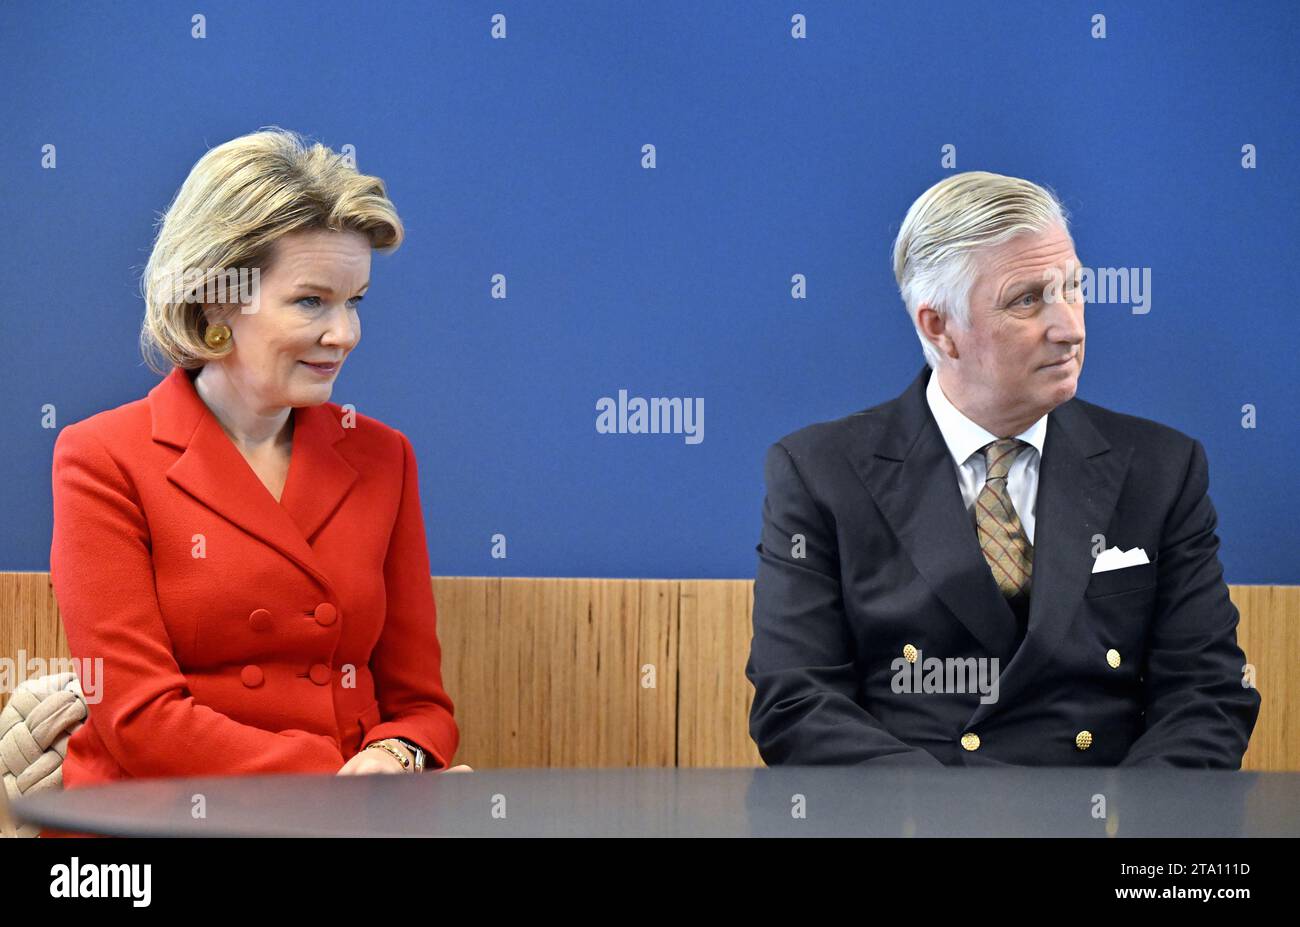 King Philippe - Filip of Belgium and Queen Mathilde of Belgium pictured during a royal visit to the editorial floor of the newspaper Le Soir, in Brussels, Tuesday 28 November 2023. The royal couple will discover the technological and substantive innovations implemented within the editorial process, in particular the initiatives taken in terms of the digitalization of information, the transversal organization of editorial work, collaborative and investigative journalism. They meet the management and journalists of Le Soir throughout their visit. BELGA PHOTO ERIC LALMAND Credit: Belga News Agen Stock Photo